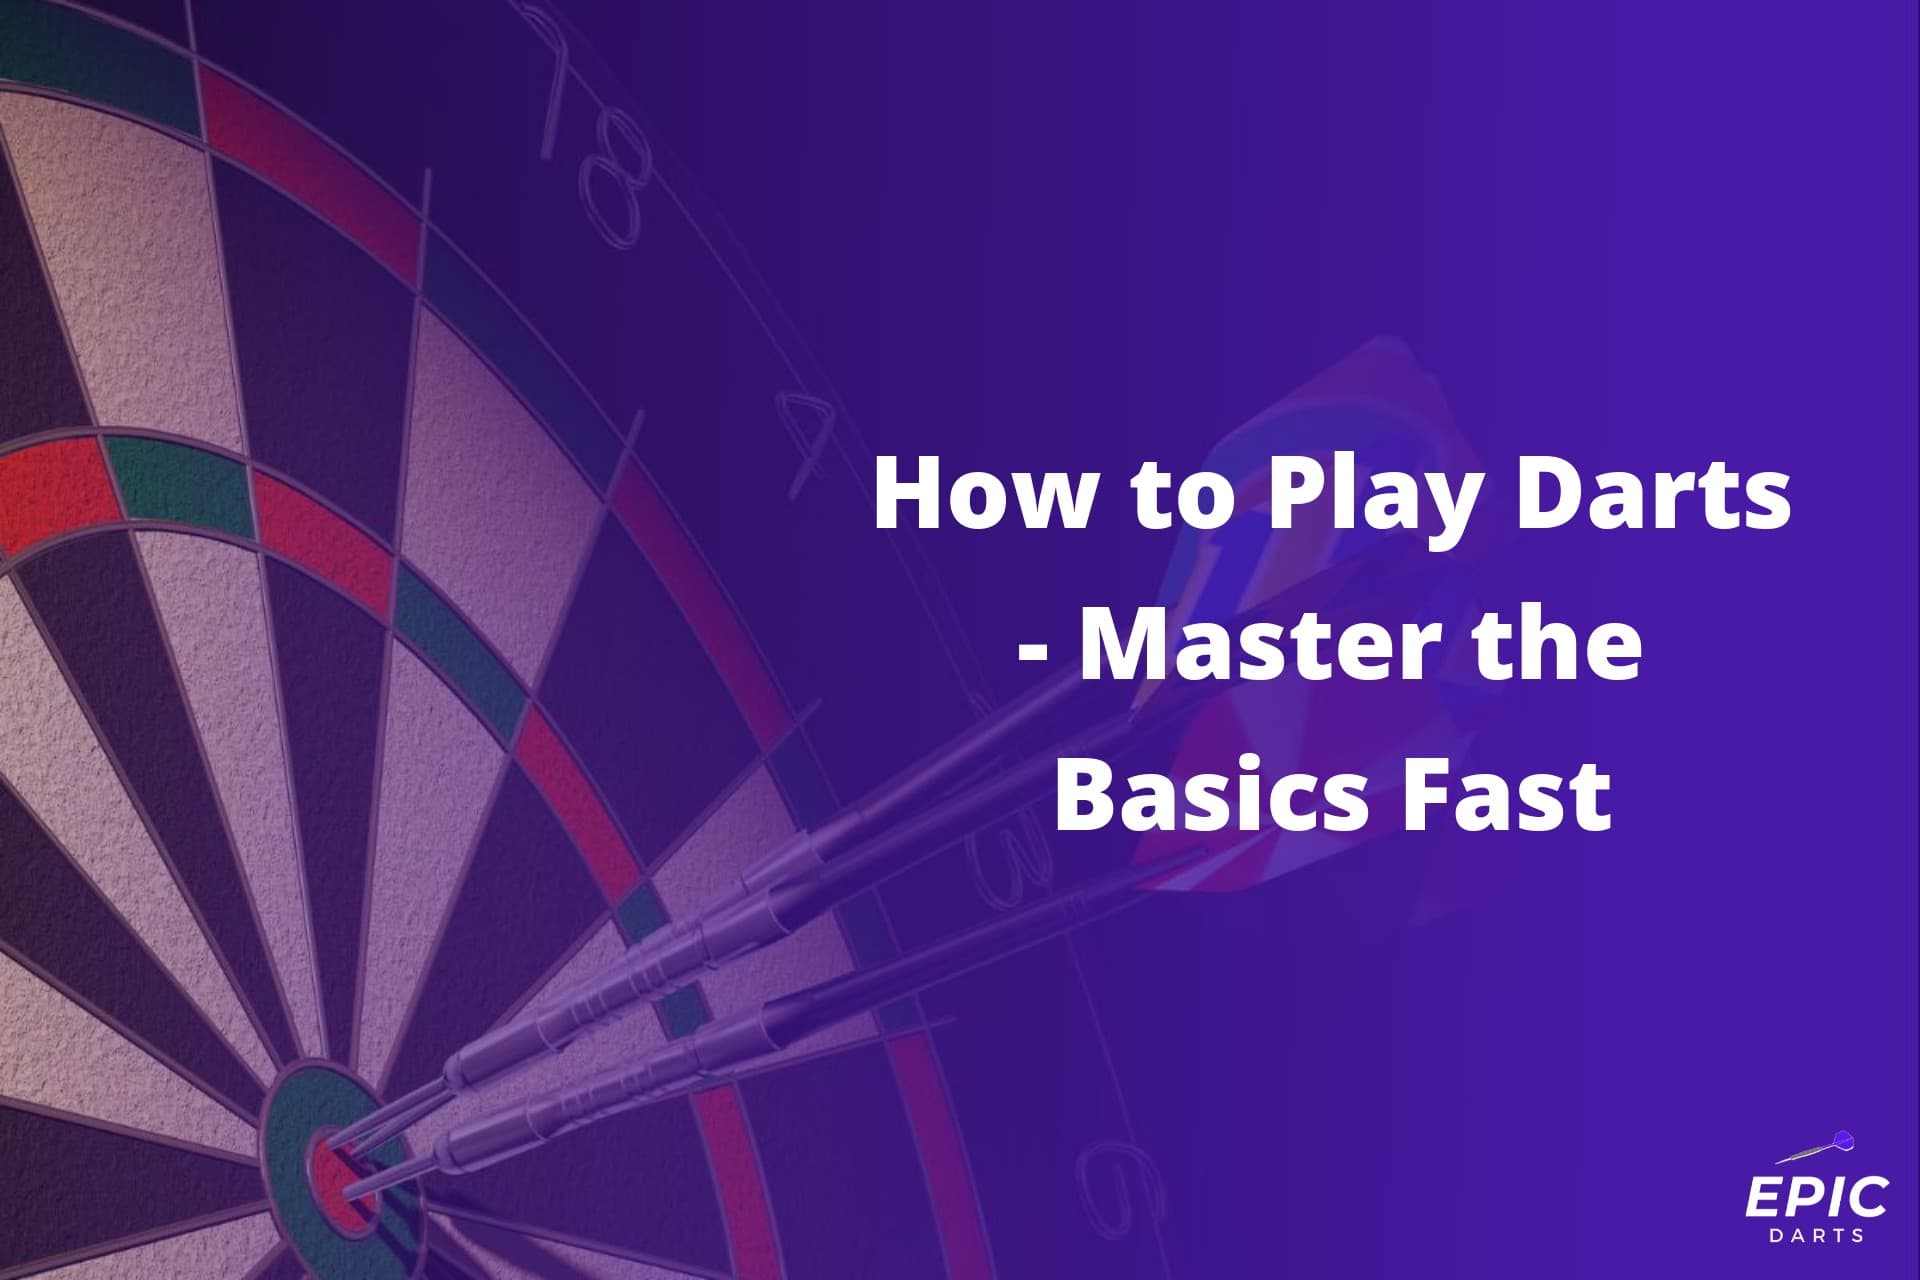 How to Play Darts – Master the Basics Fast